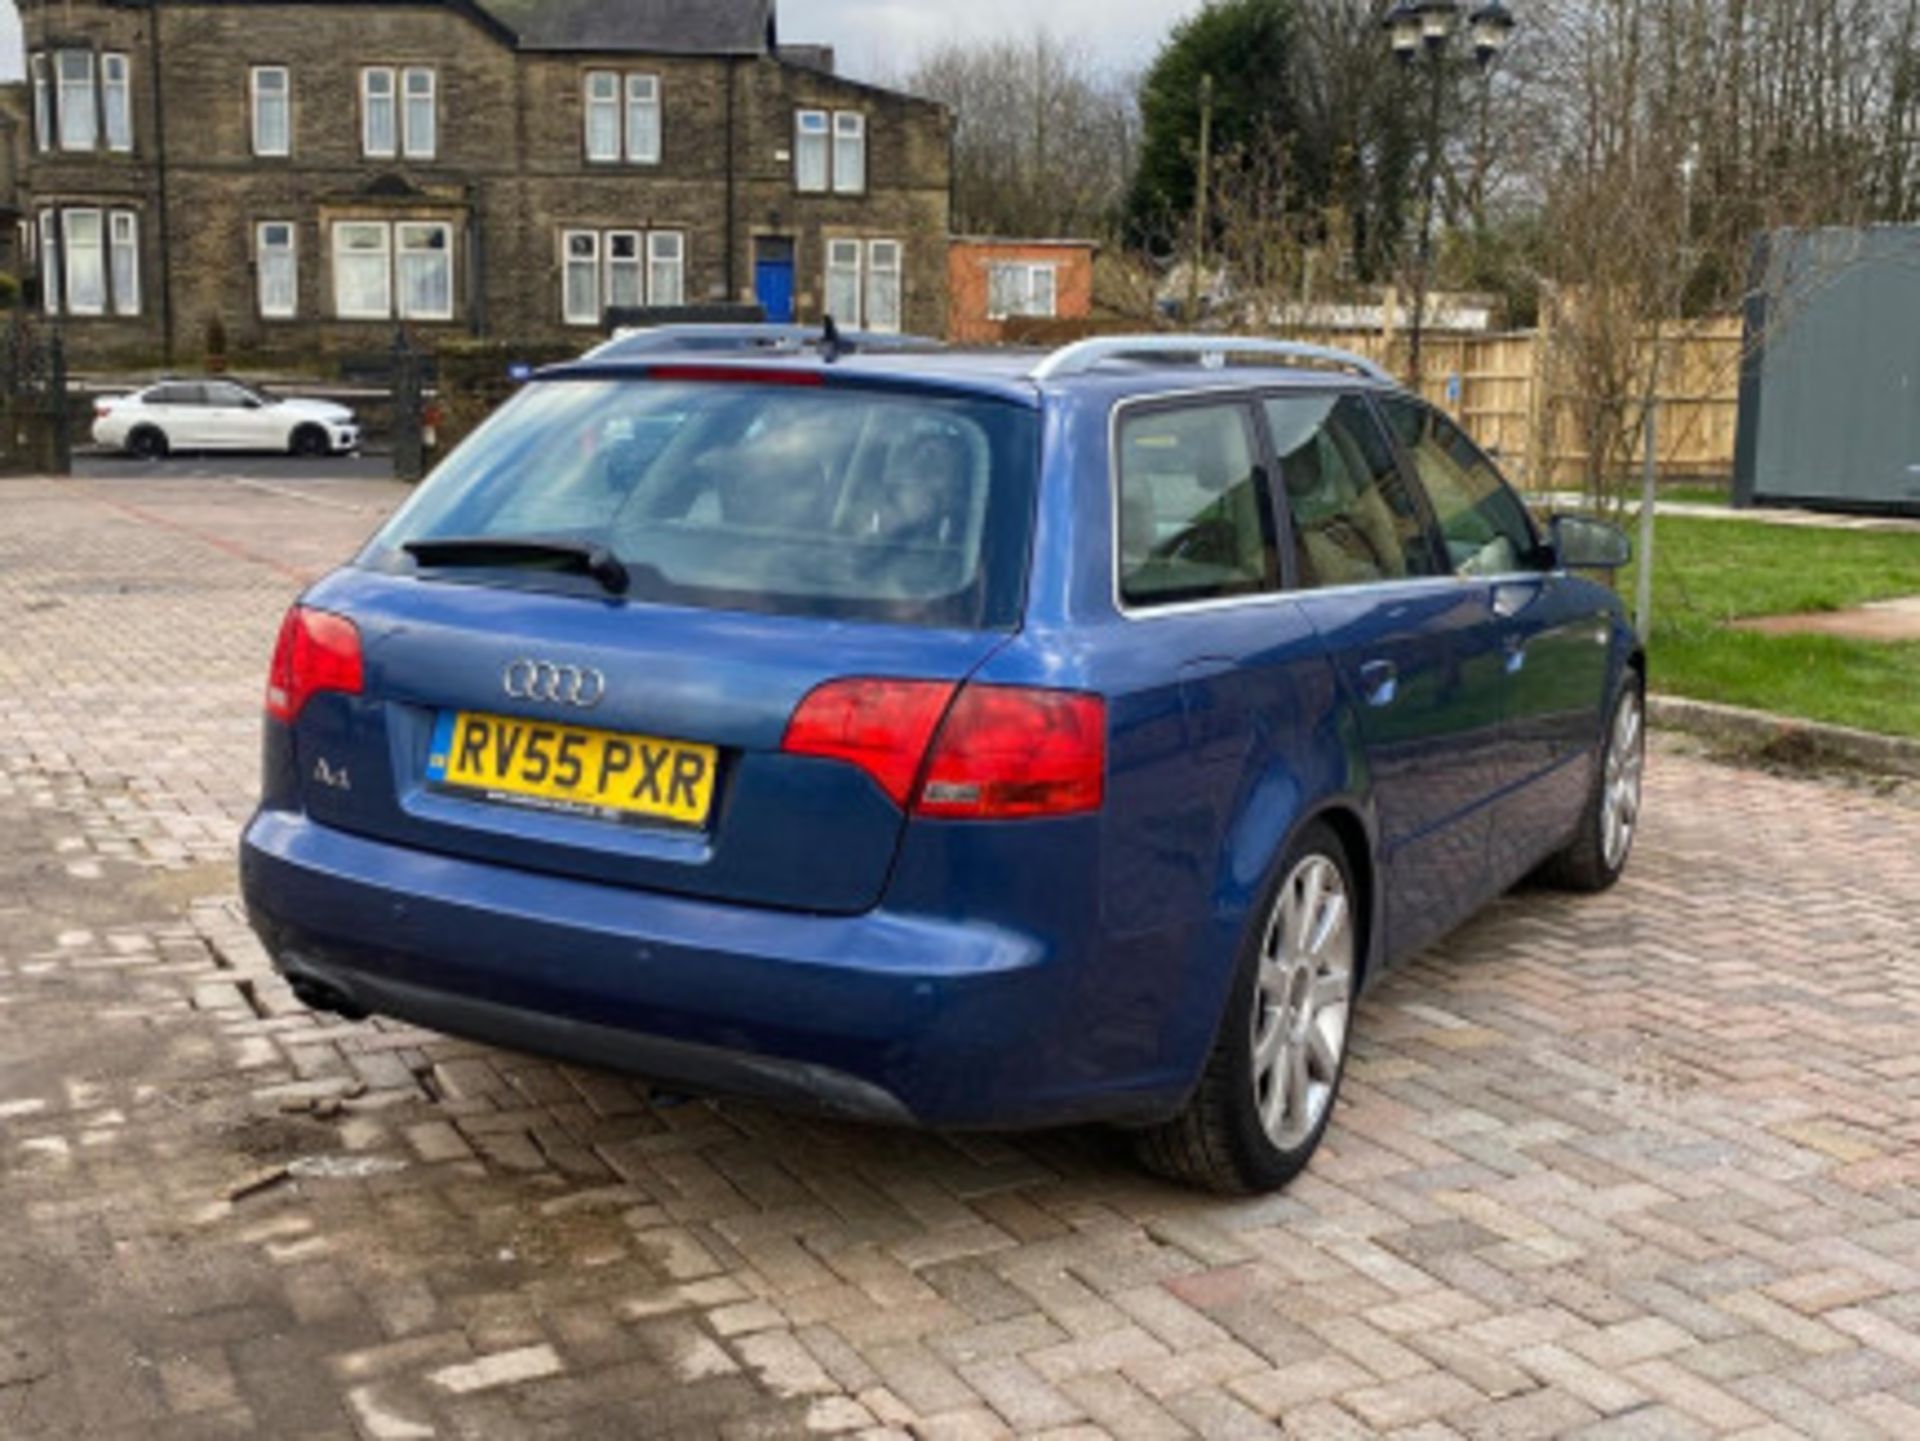 AUDI A4 AVANT 1.9 TDI SE 5DR ESTATE - RARE AND RELIABLE LUXURY WAGON >>--NO VAT ON HAMMER--<< - Image 38 of 97